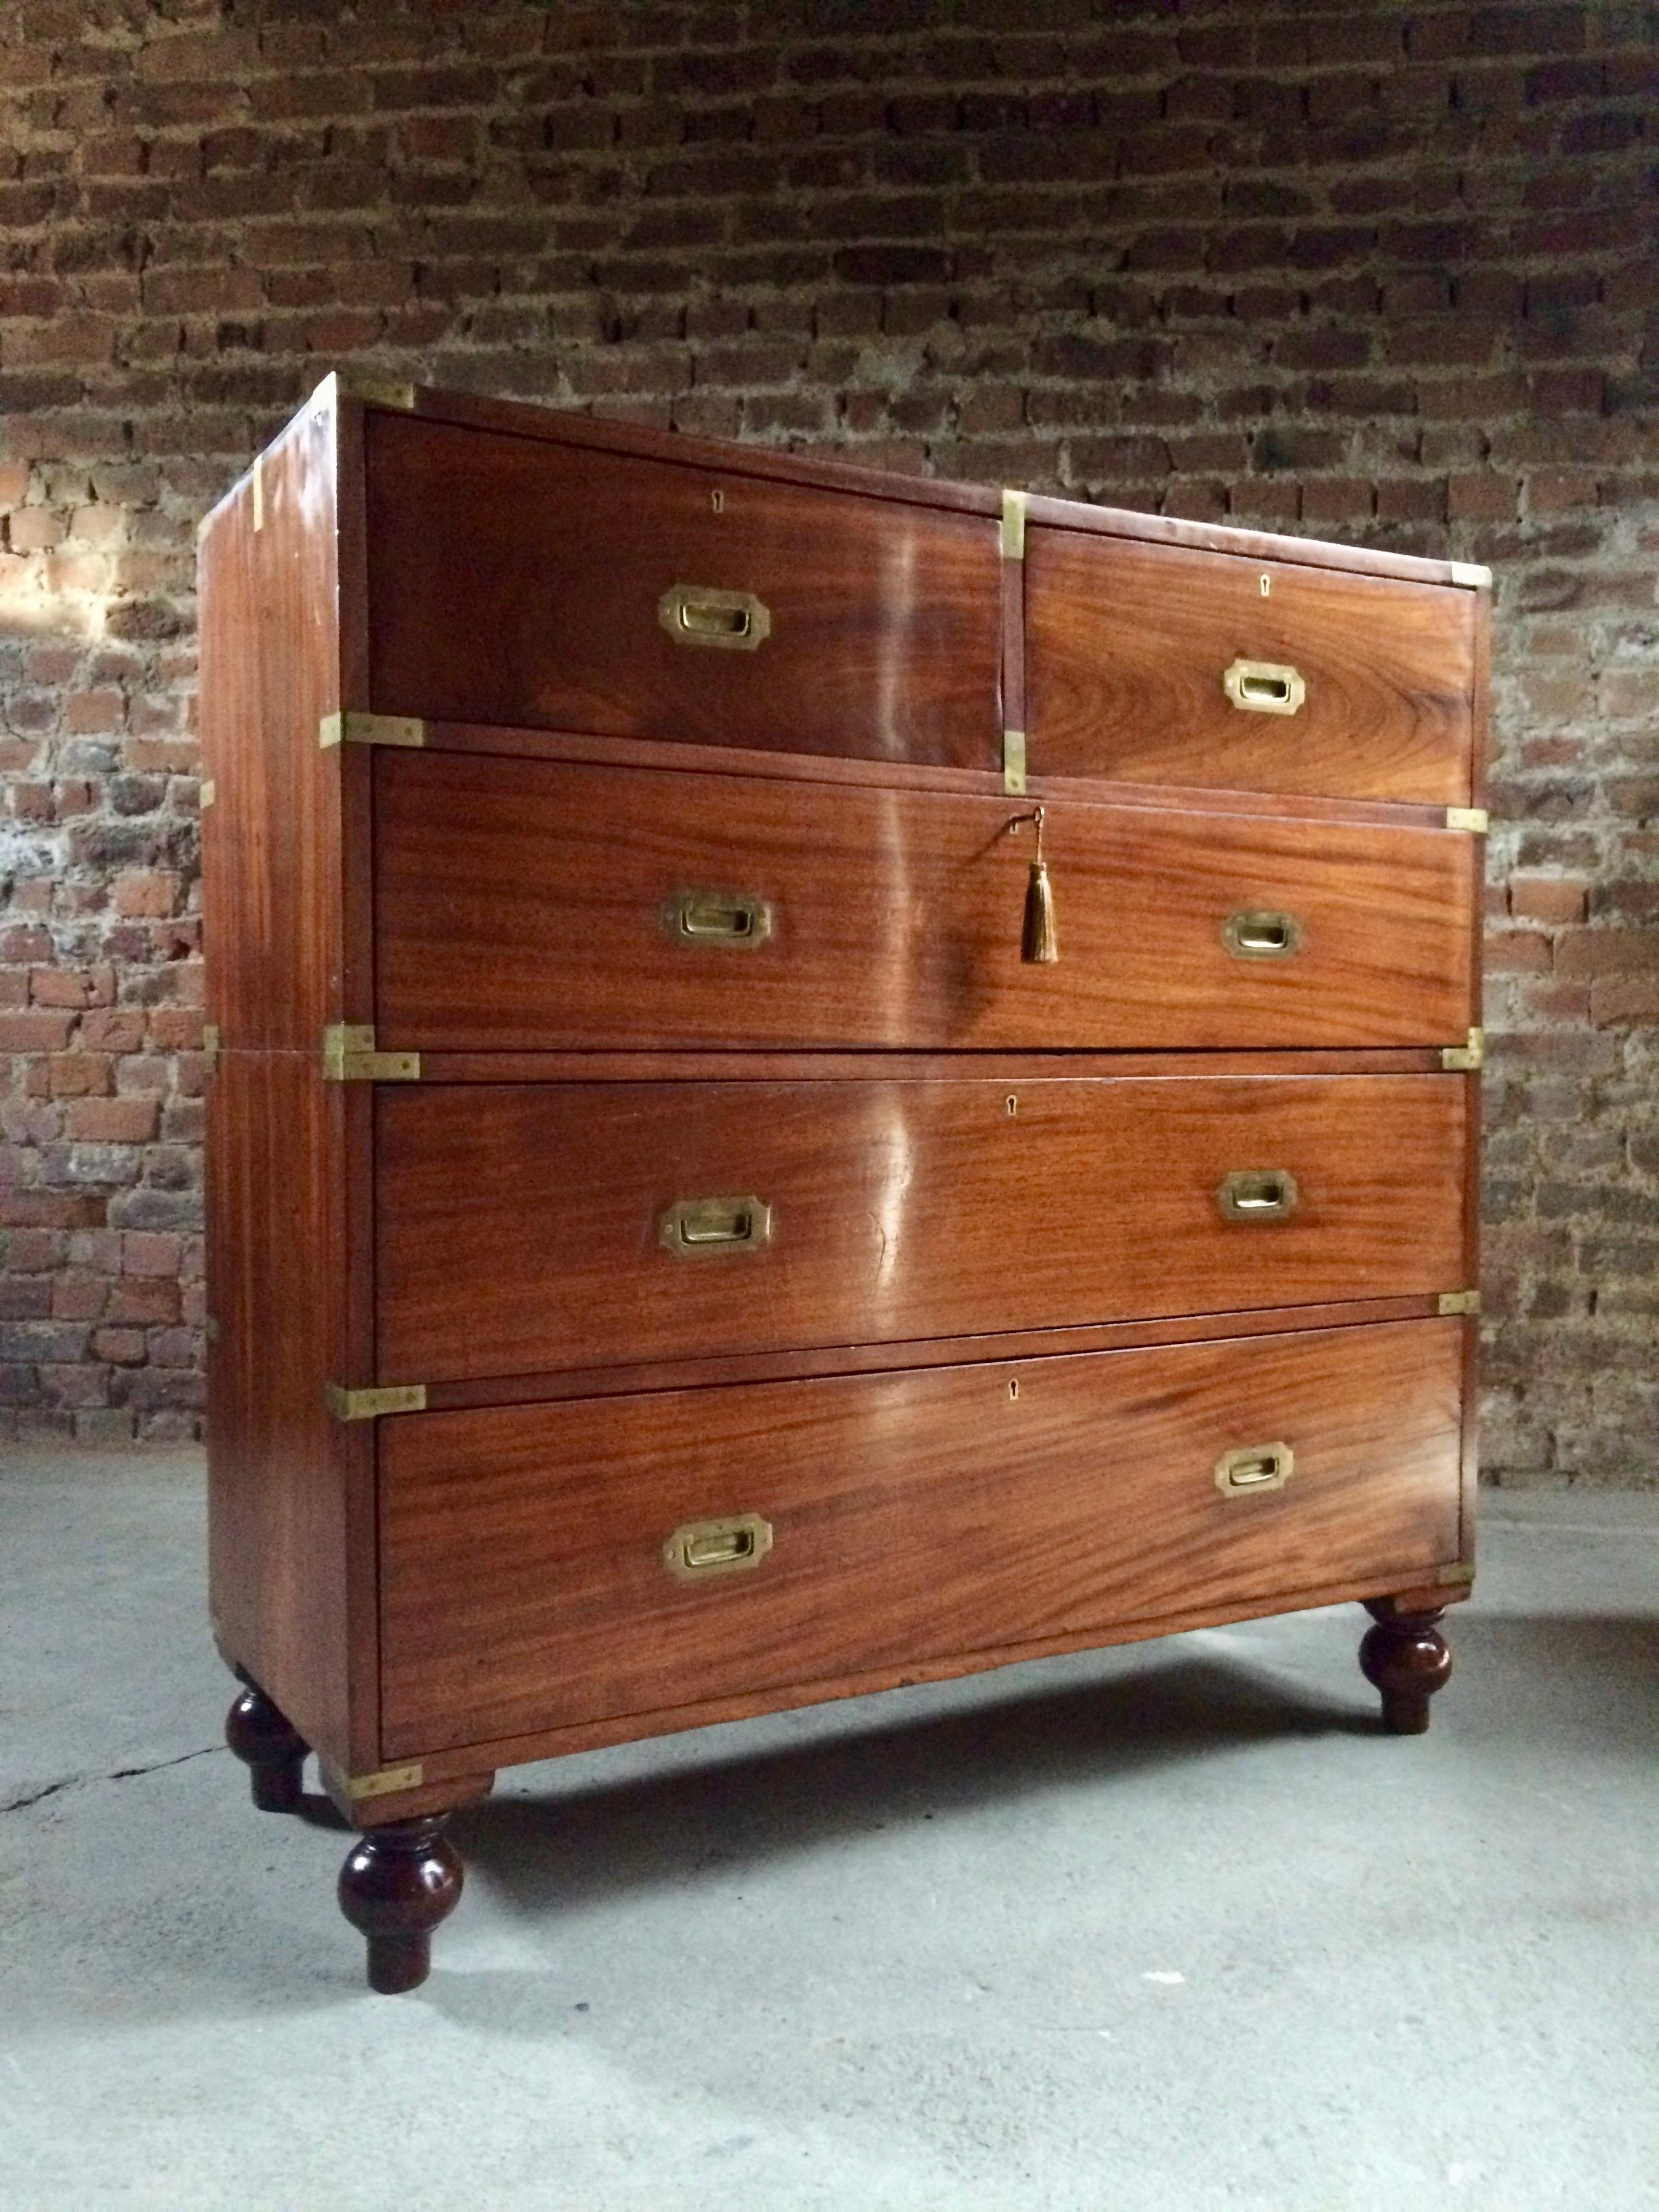 Antique Campaign chest of drawers dresser mahogany tall military Victorian no. 3.

A magnificent tall and impressive antique 19th century mahogany brass-mounted campaign chest of drawers, the rectangular top complete with brass corner protectors